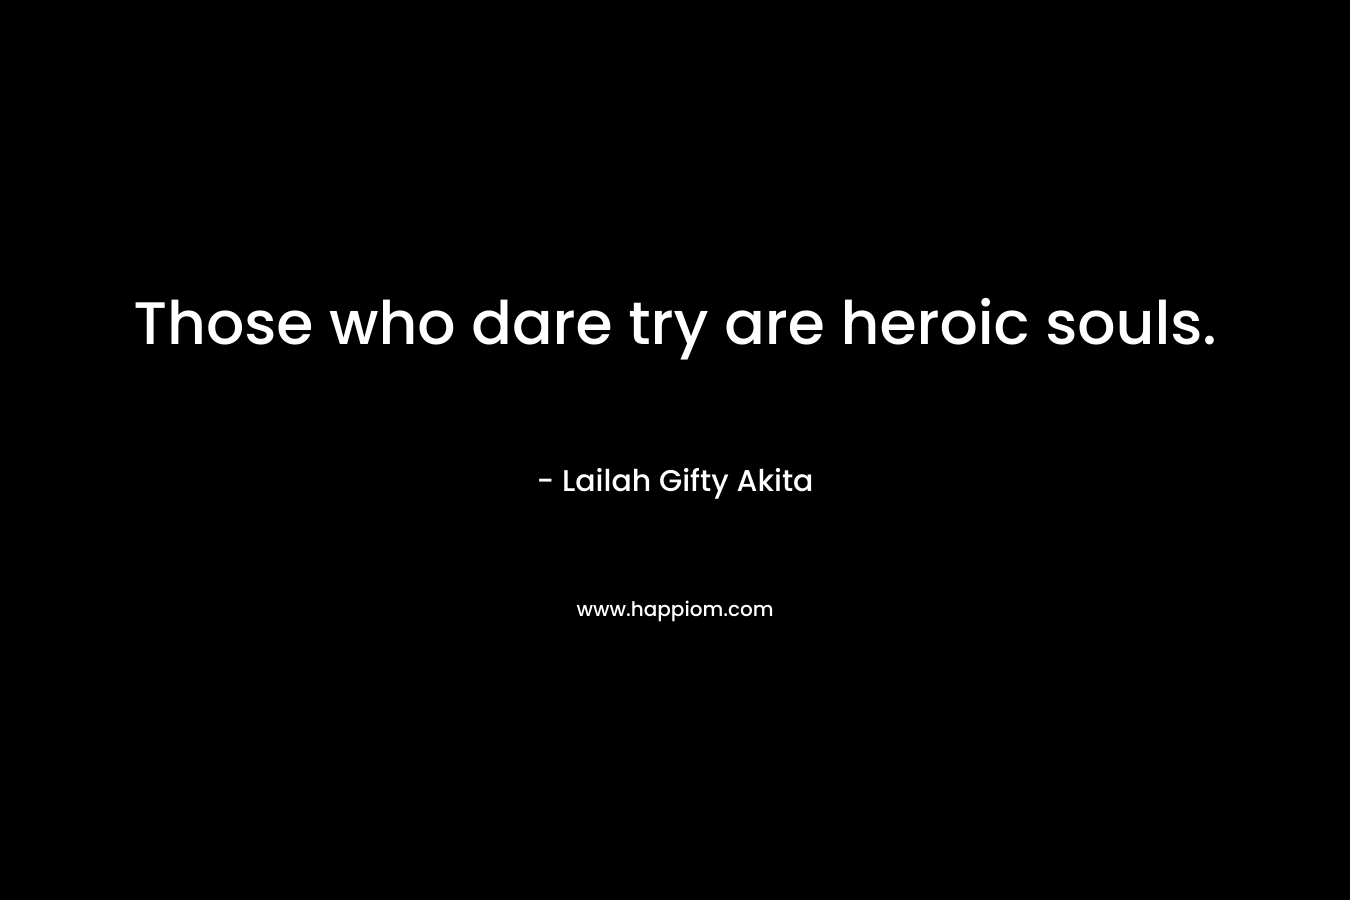 Those who dare try are heroic souls.